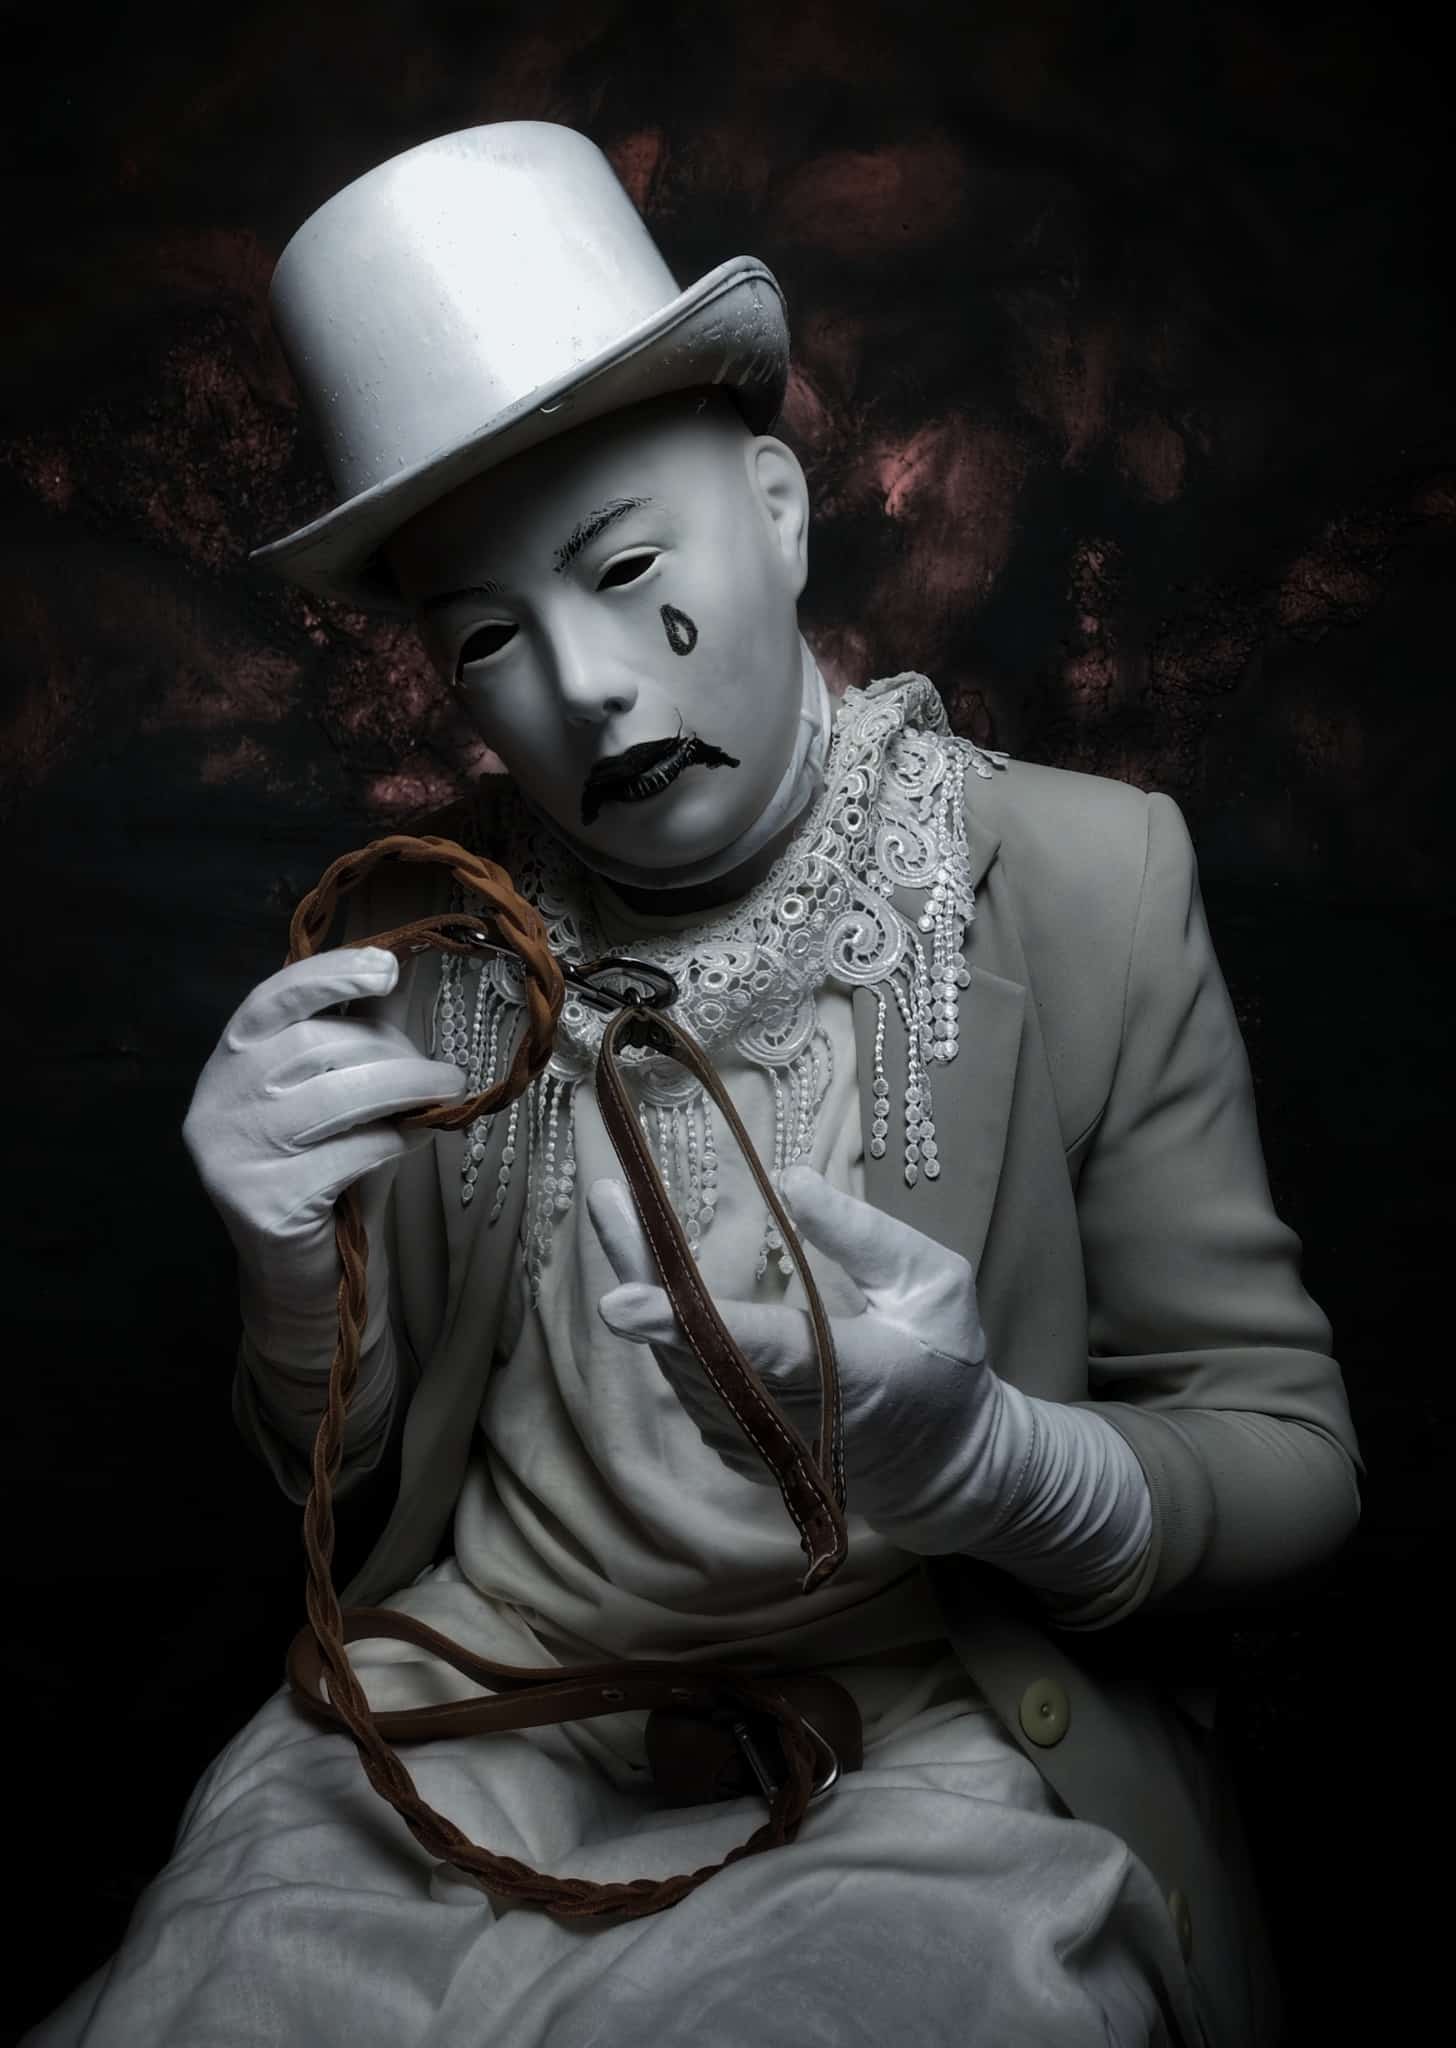 Horror photographer Peter Murín: Masks are the incognito, the mysterious. I shape precisely the expression I desire.